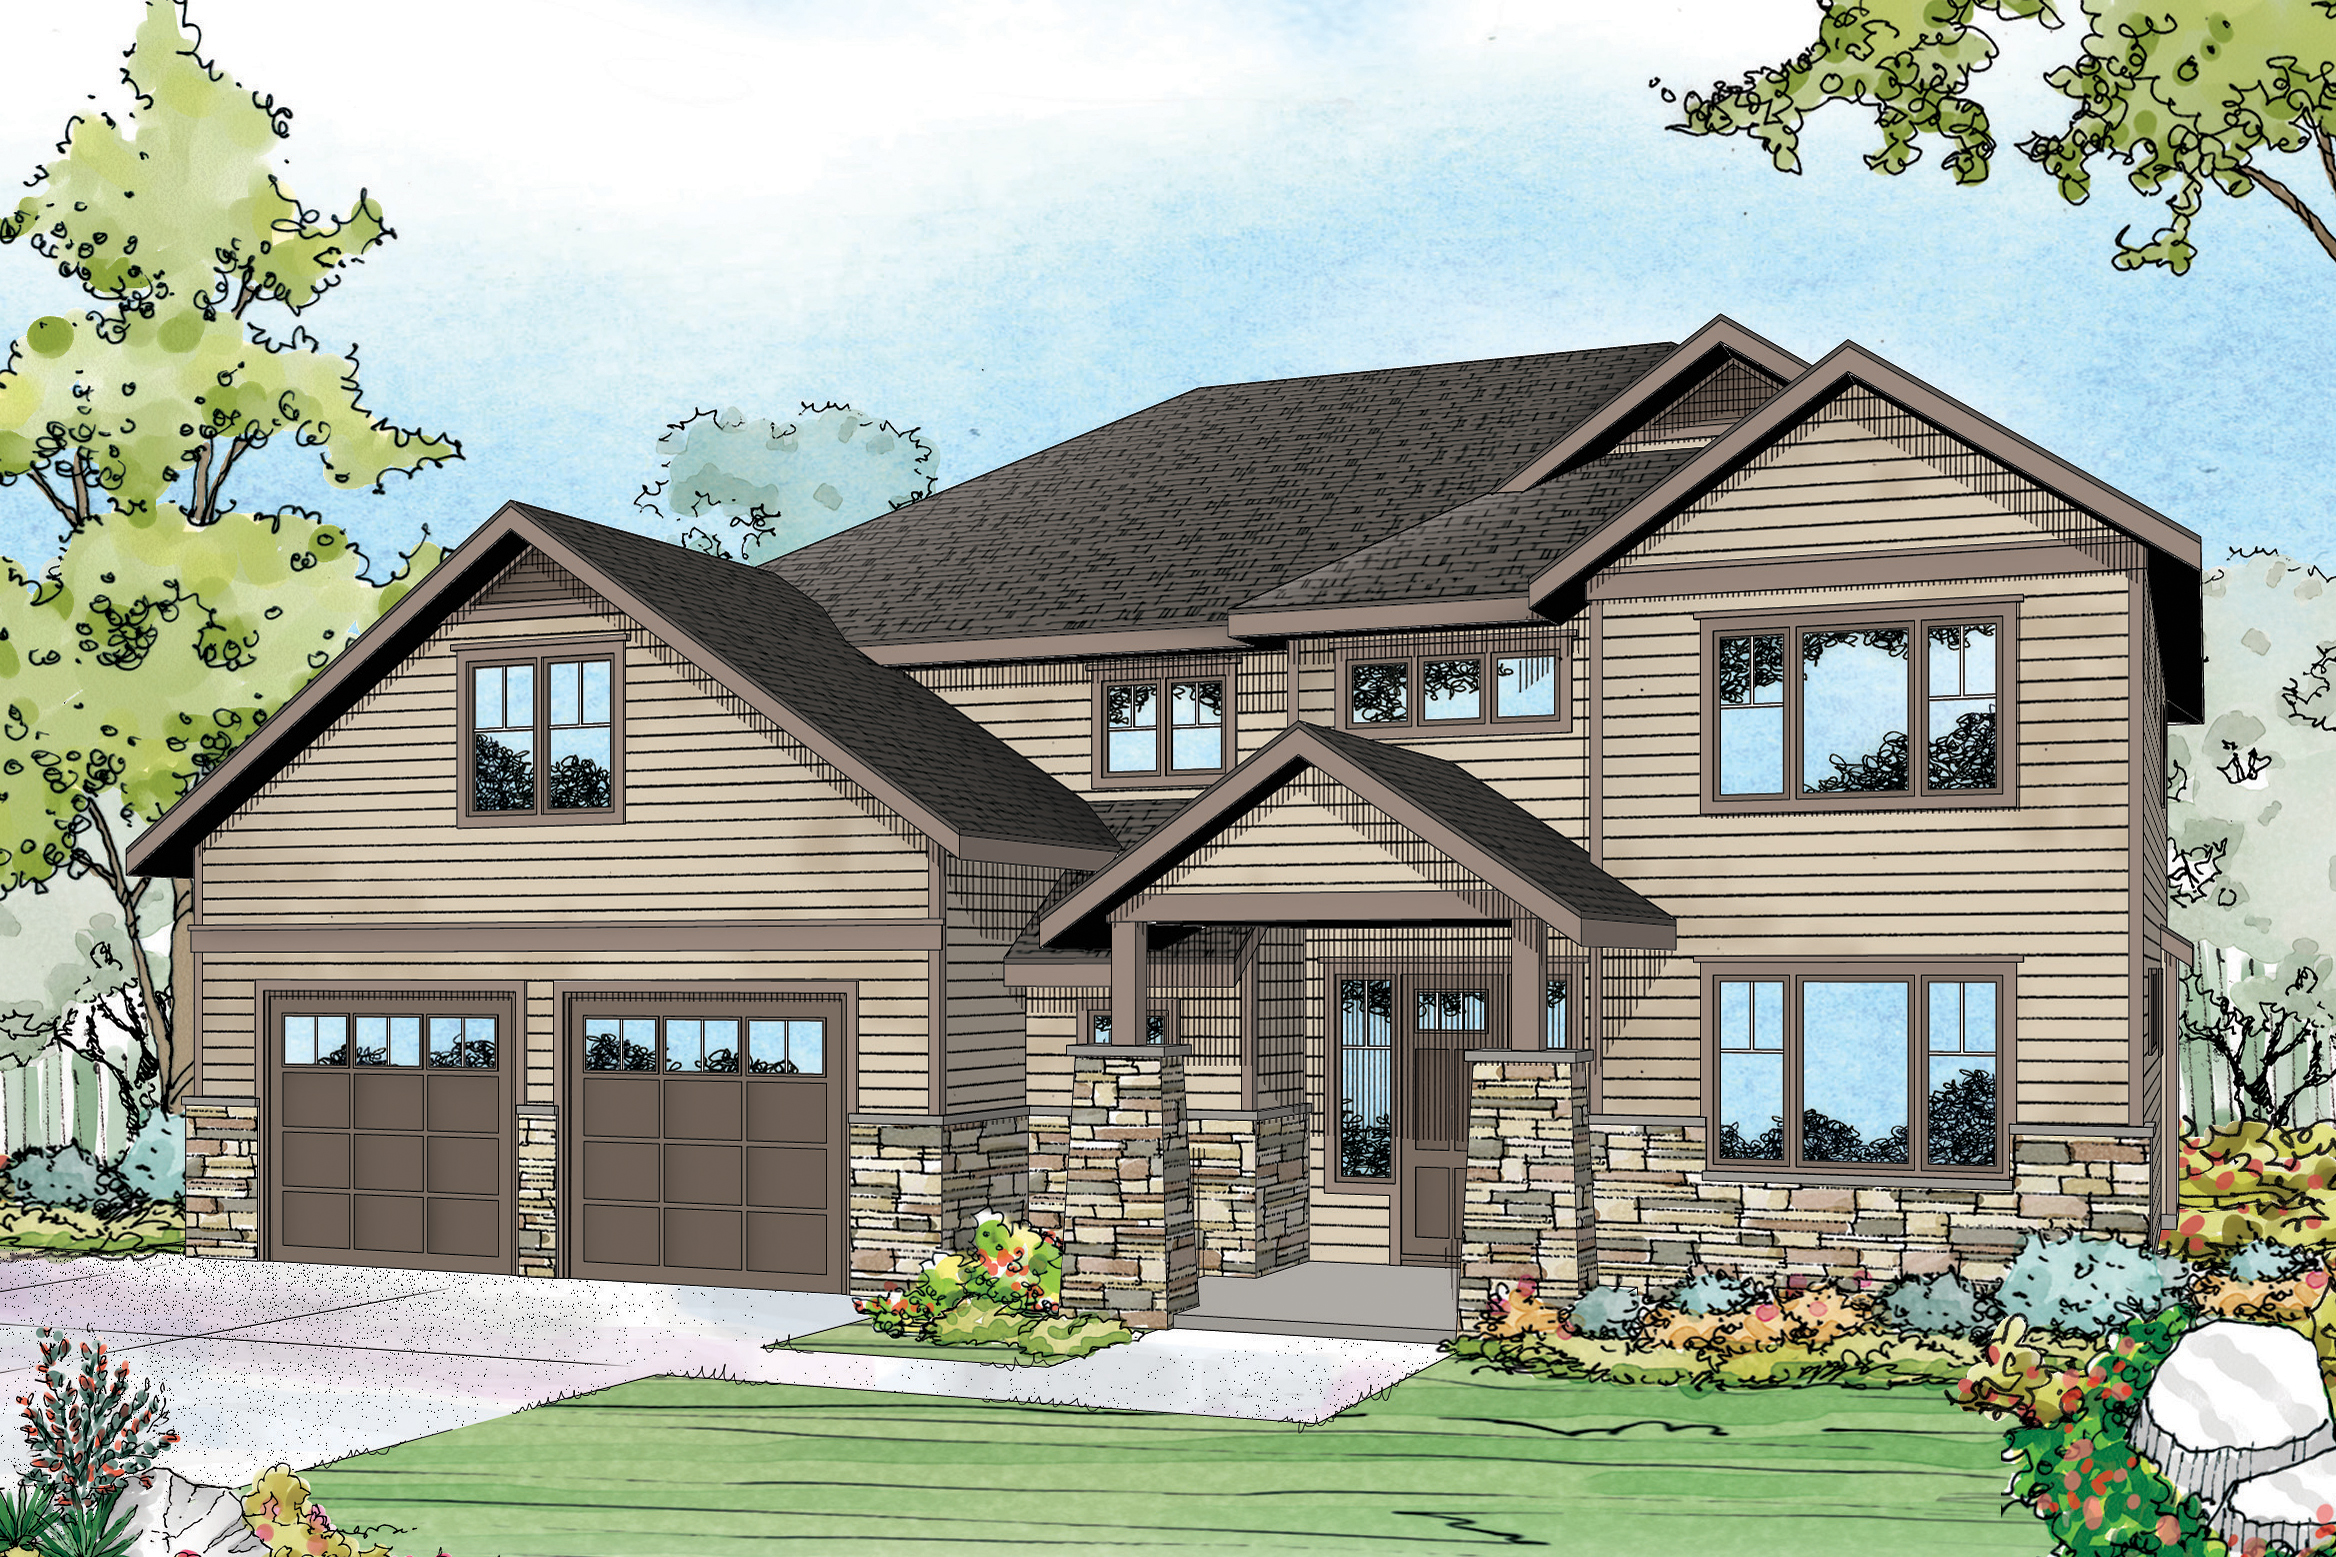 Craftsman House Plan, Country House Plan, Home Plan, Forest Grove 30-954